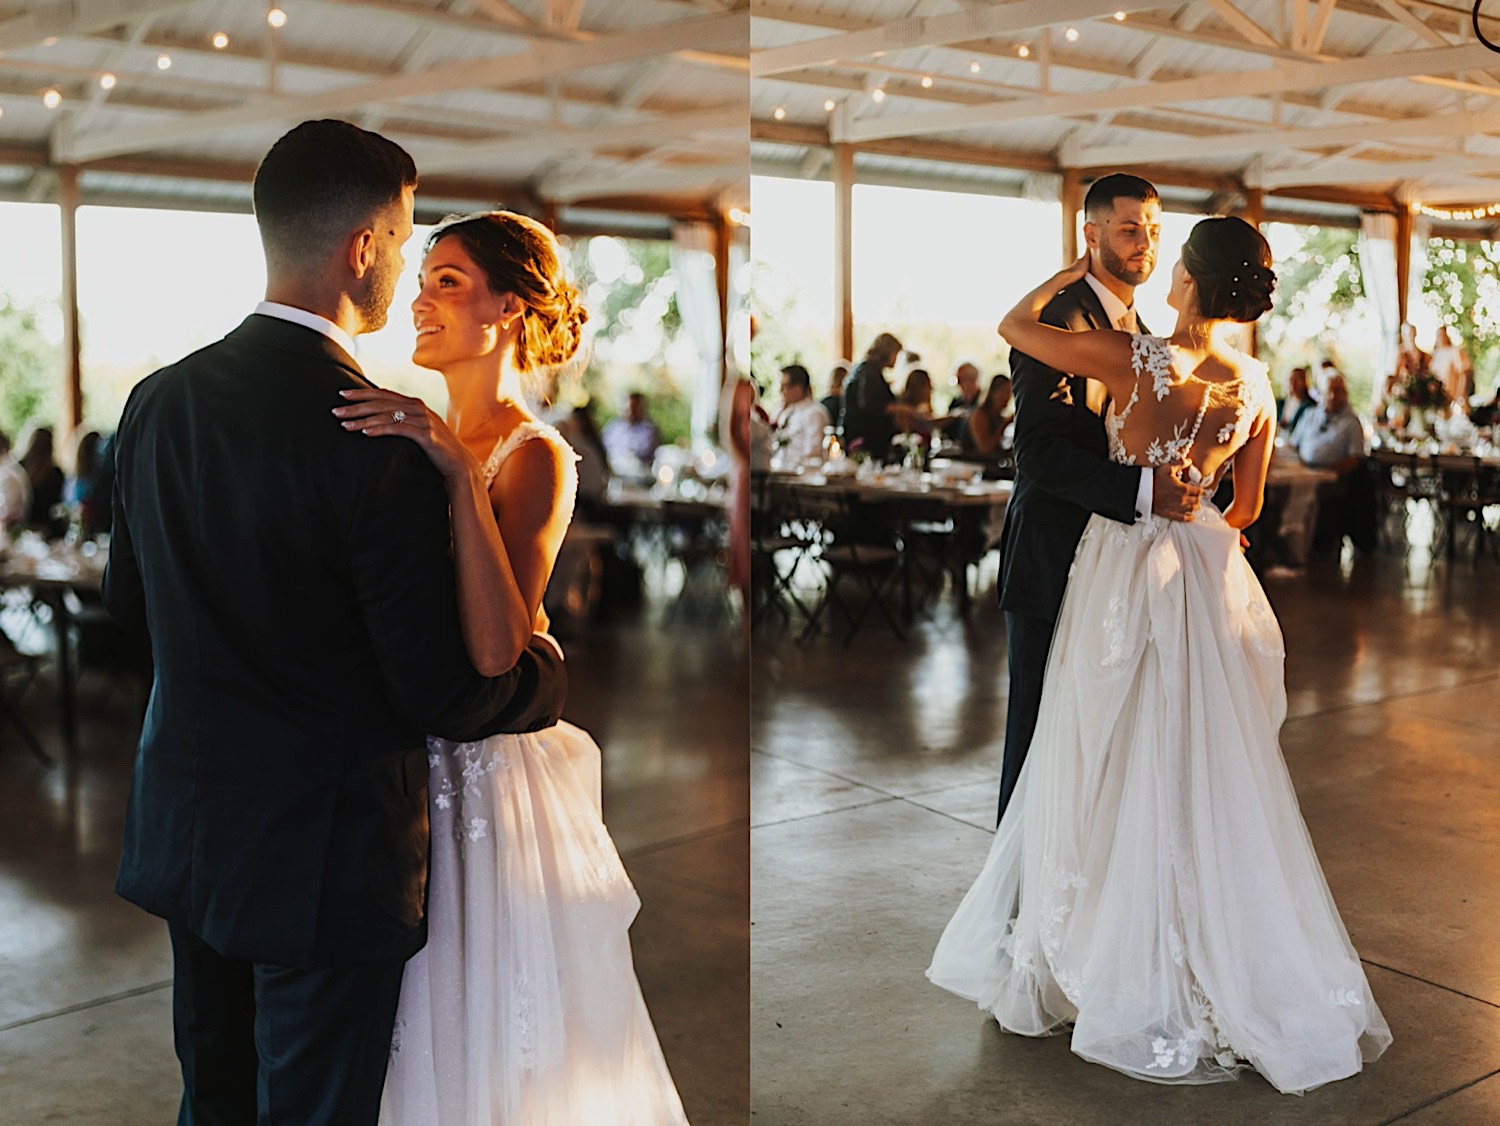 2 photos side by side of a bride and groom sharing their first dance while the sun sets